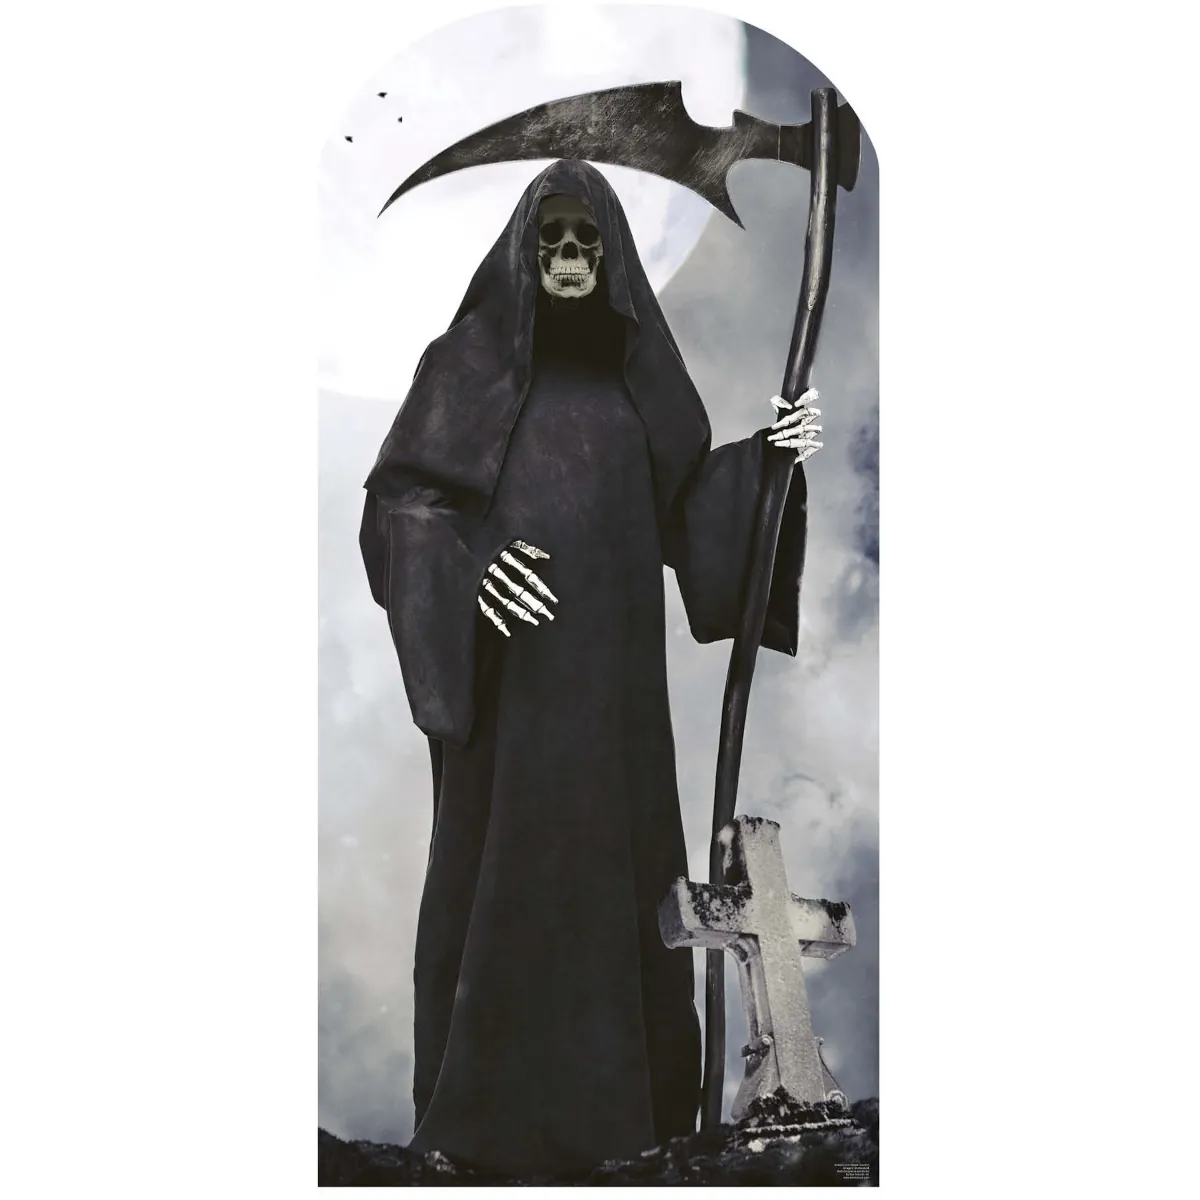 SC4226 Grim Reaper (Mythological Character) Lifesize Stand-In Cardboard Cutout Standee Front